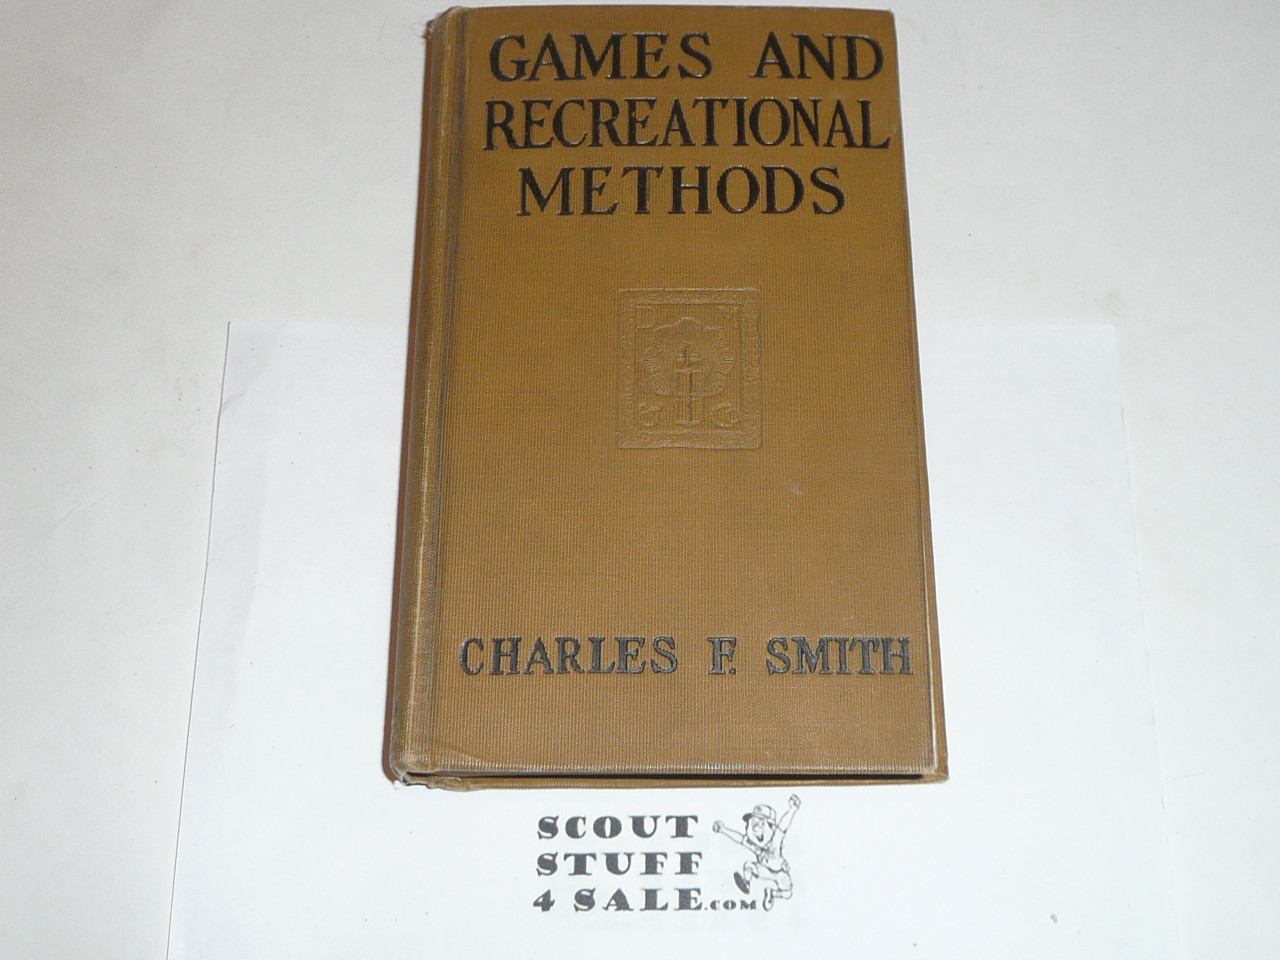 1947 Games and Recreational Methods for Clubs Camps and Scouts, by Charles Smith